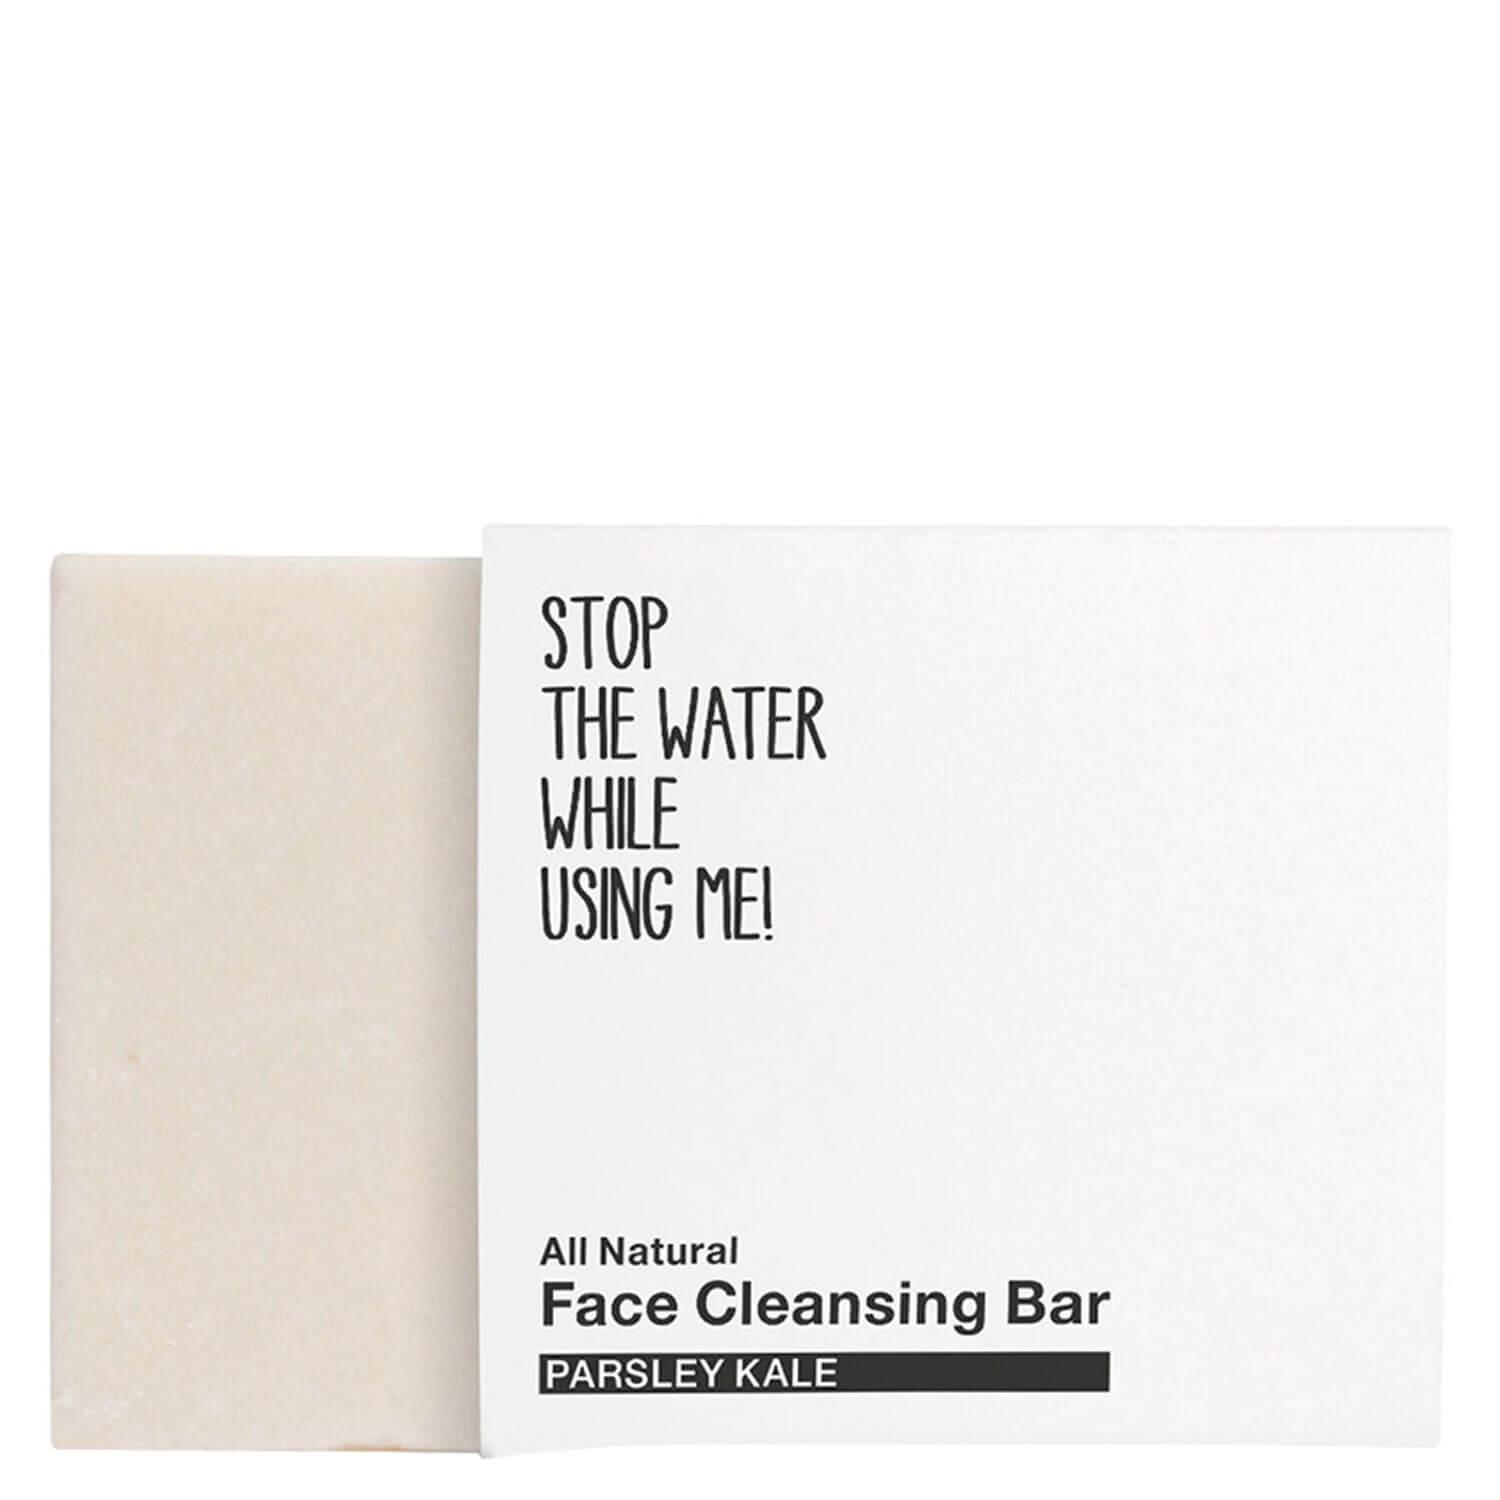 All Natural Face - Face Cleansing Bar Parsley Kale